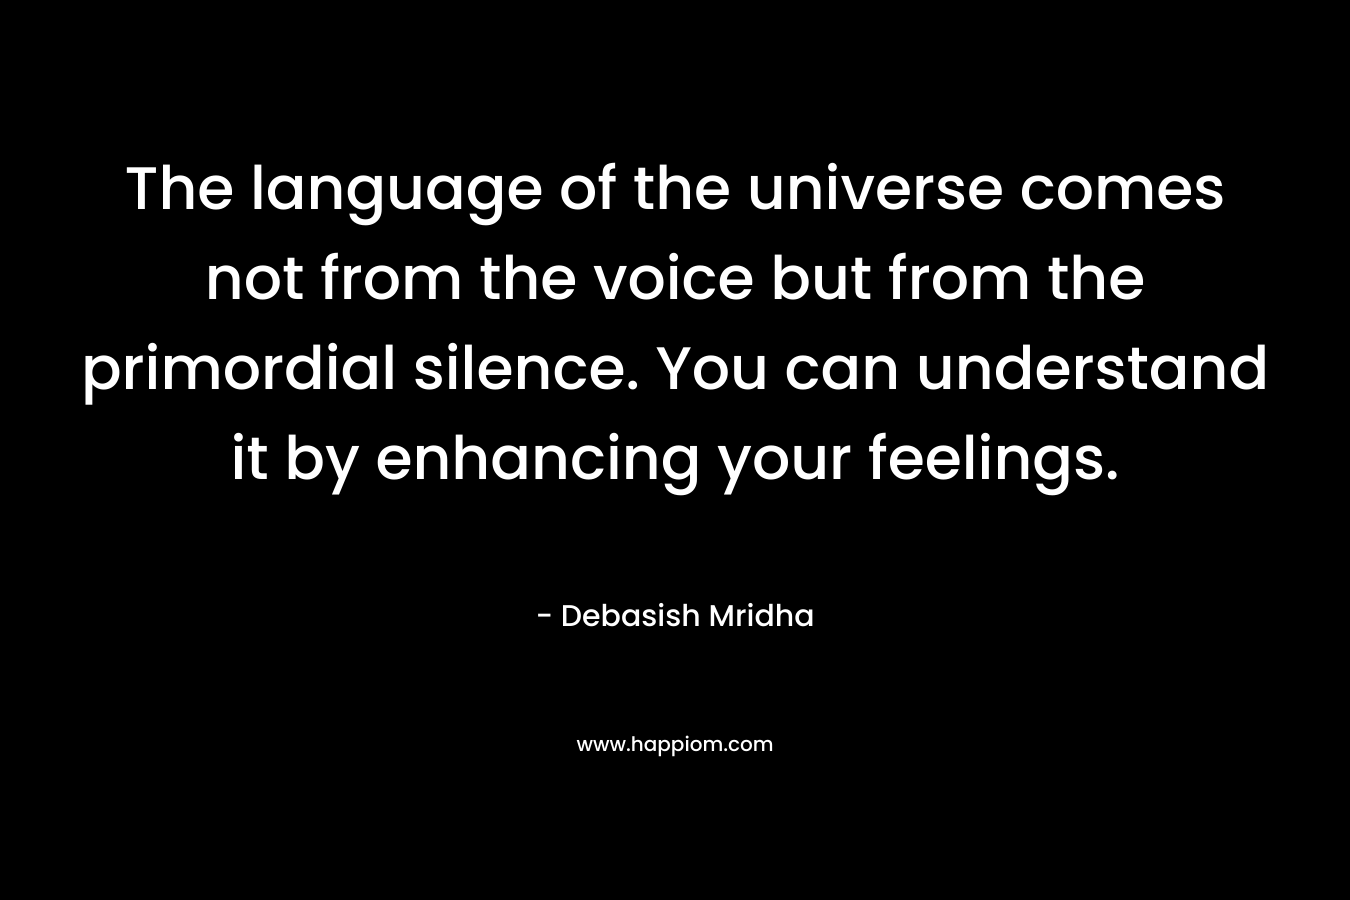 The language of the universe comes not from the voice but from the primordial silence. You can understand it by enhancing your feelings. – Debasish Mridha